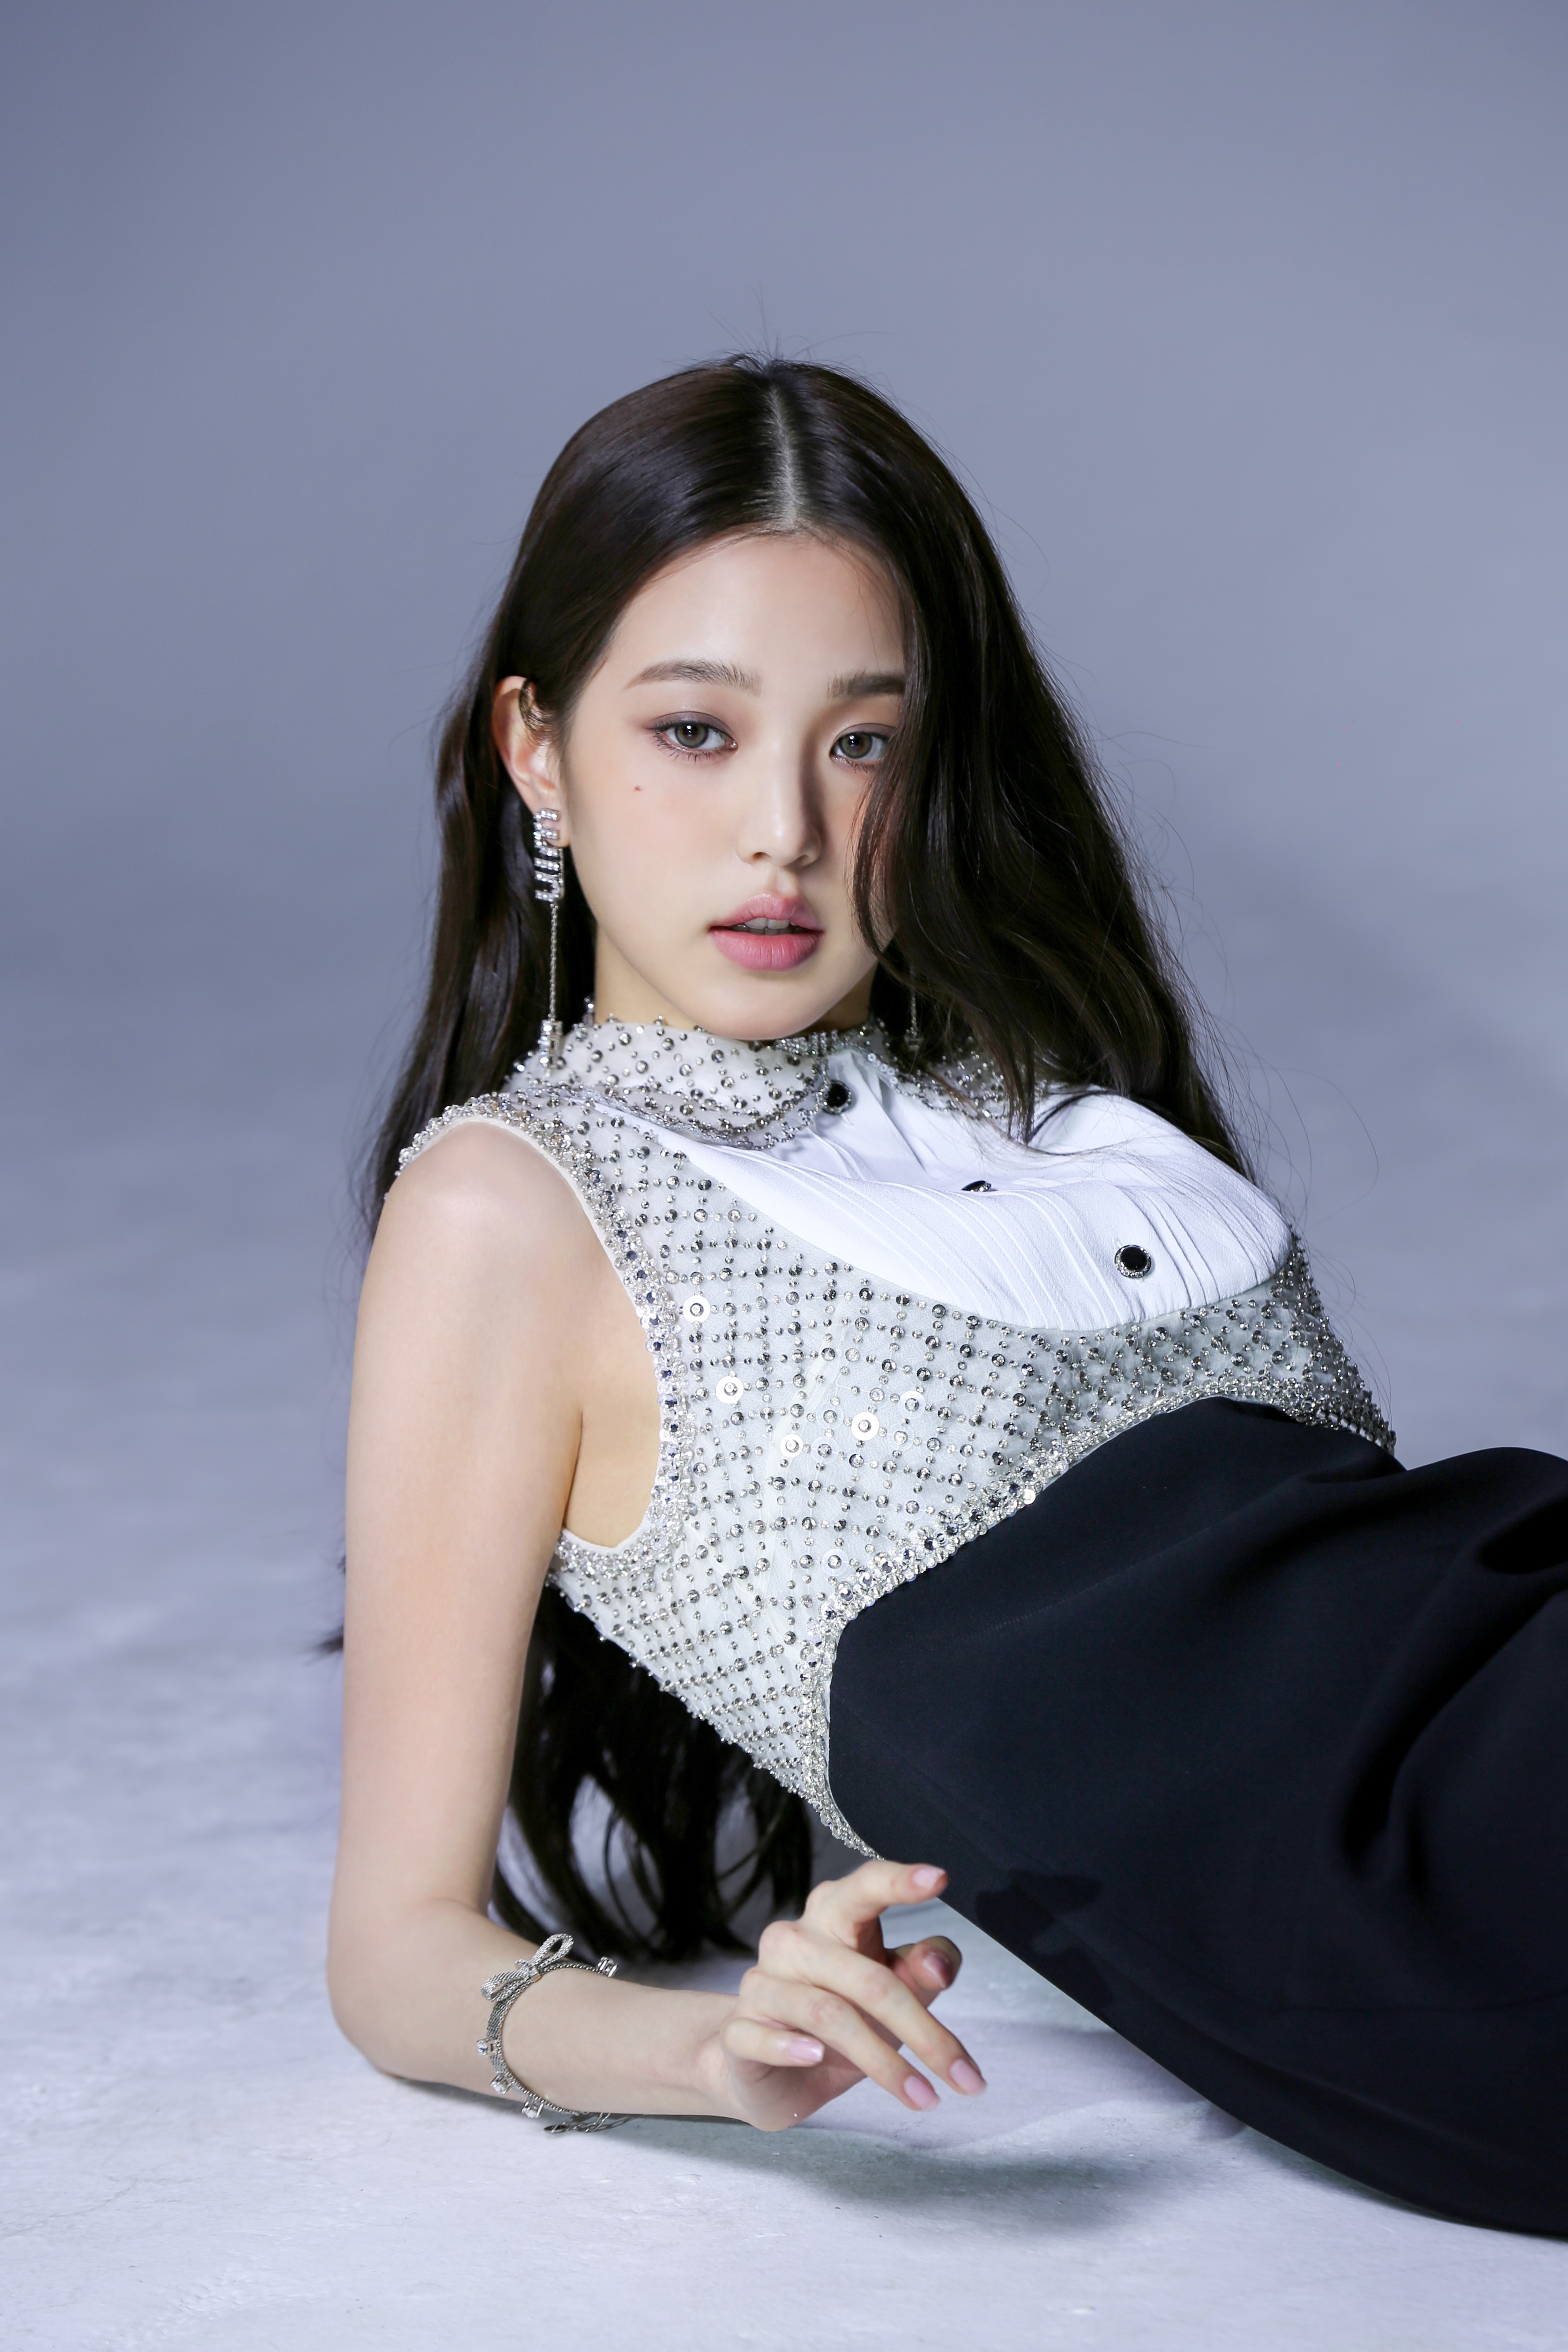 IVE YU JIN WON YOUNG, "Knowing Bros". WON YOUNG X BAZAAR December cover photoshoot behind the scenes.